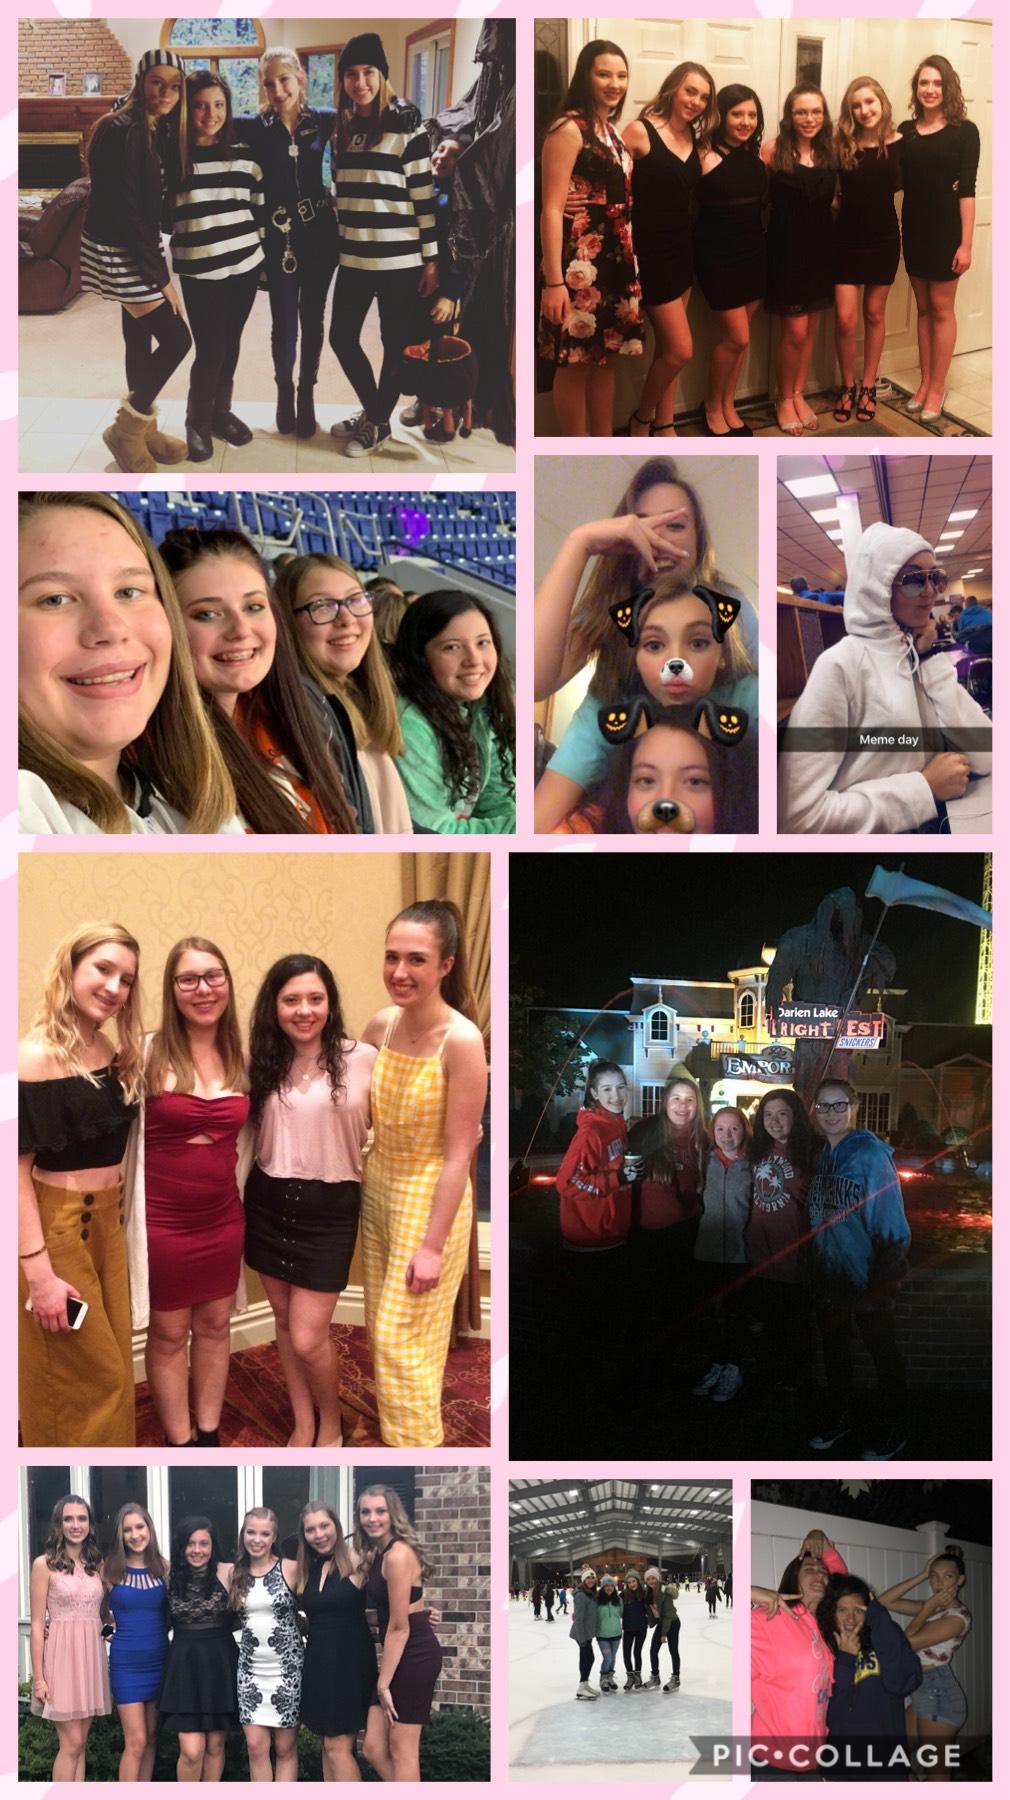 It’s so hard to believe that freshman year is already coming to an end. It seems like it was just yesterday we were promising each other not to leave💕I love you all❤️ Olivia, Kennedy, Andrea, Miranda and Madeline 